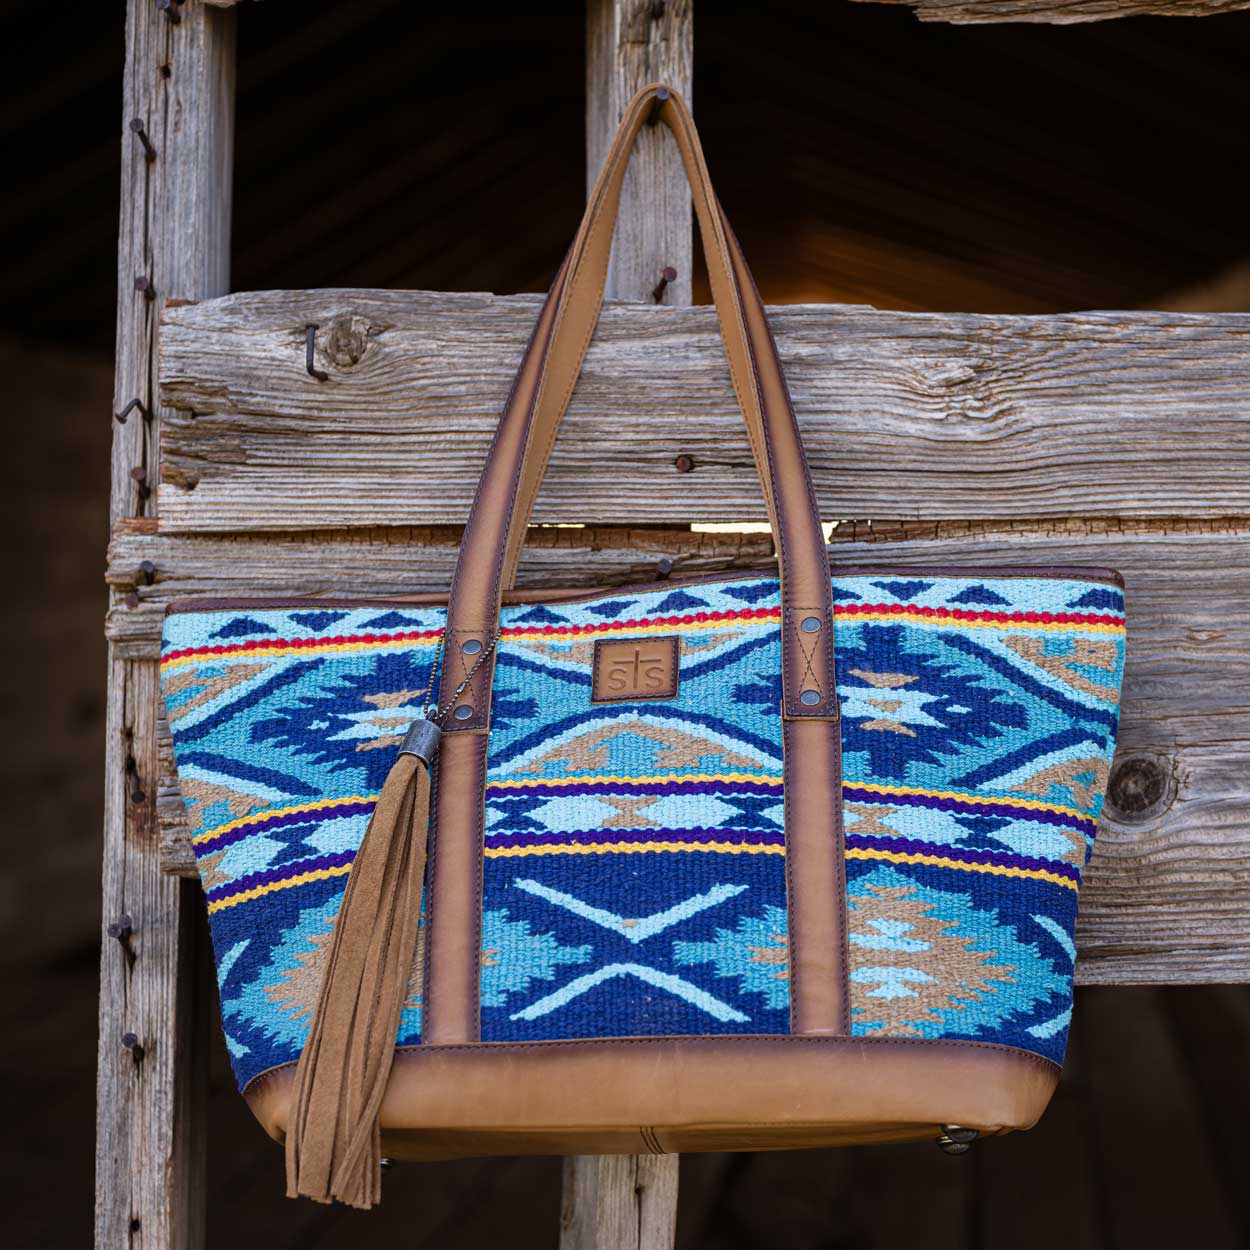 Mojave Sky Tote By STS Ranchwear